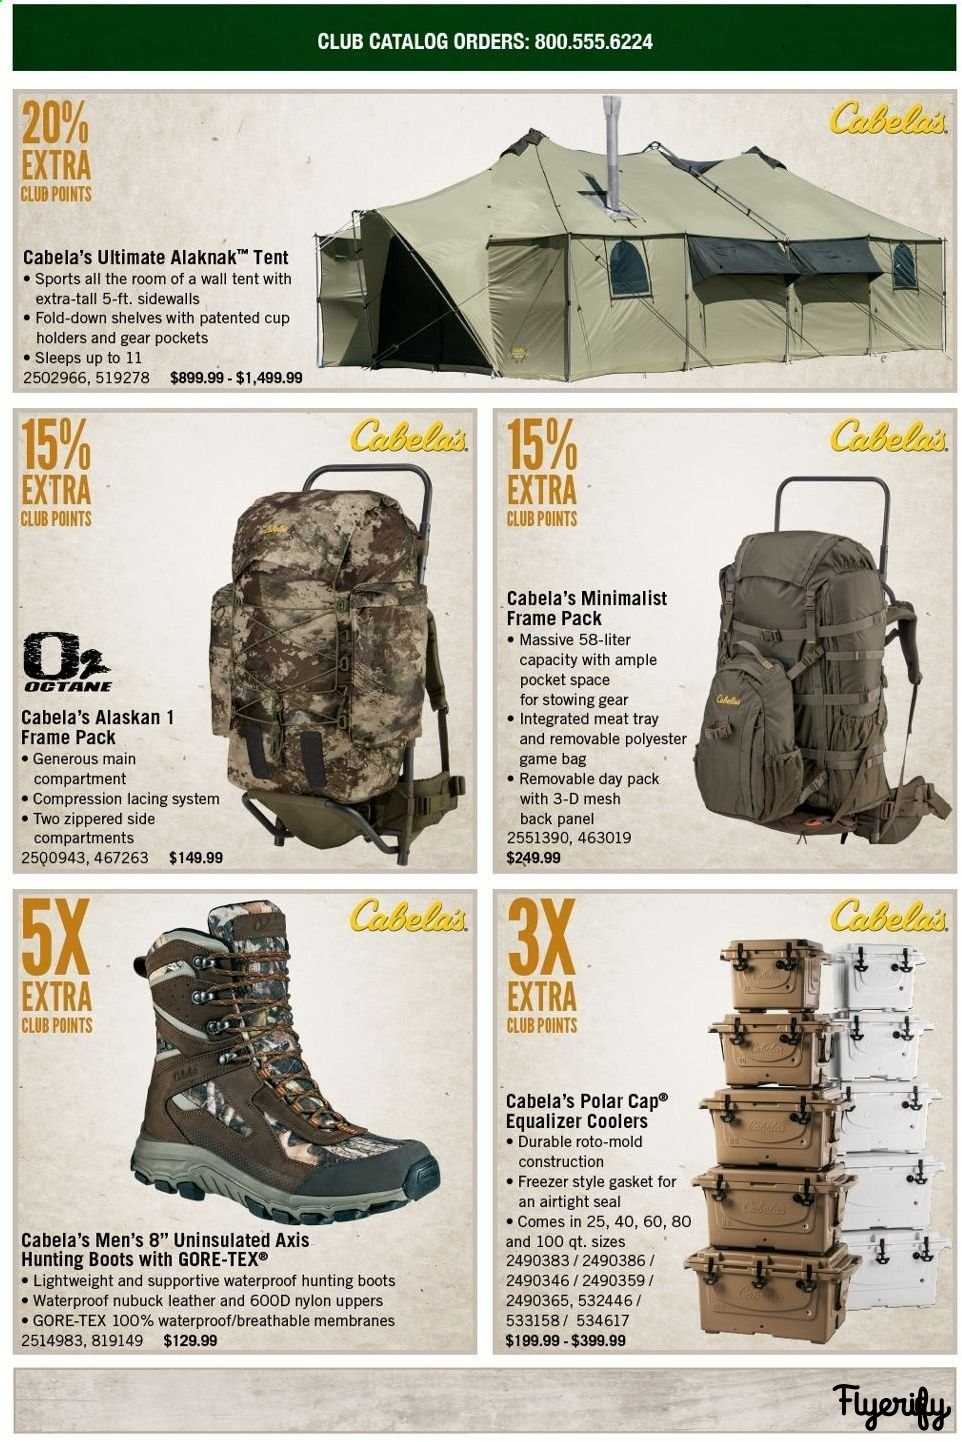 cabelas axis boots